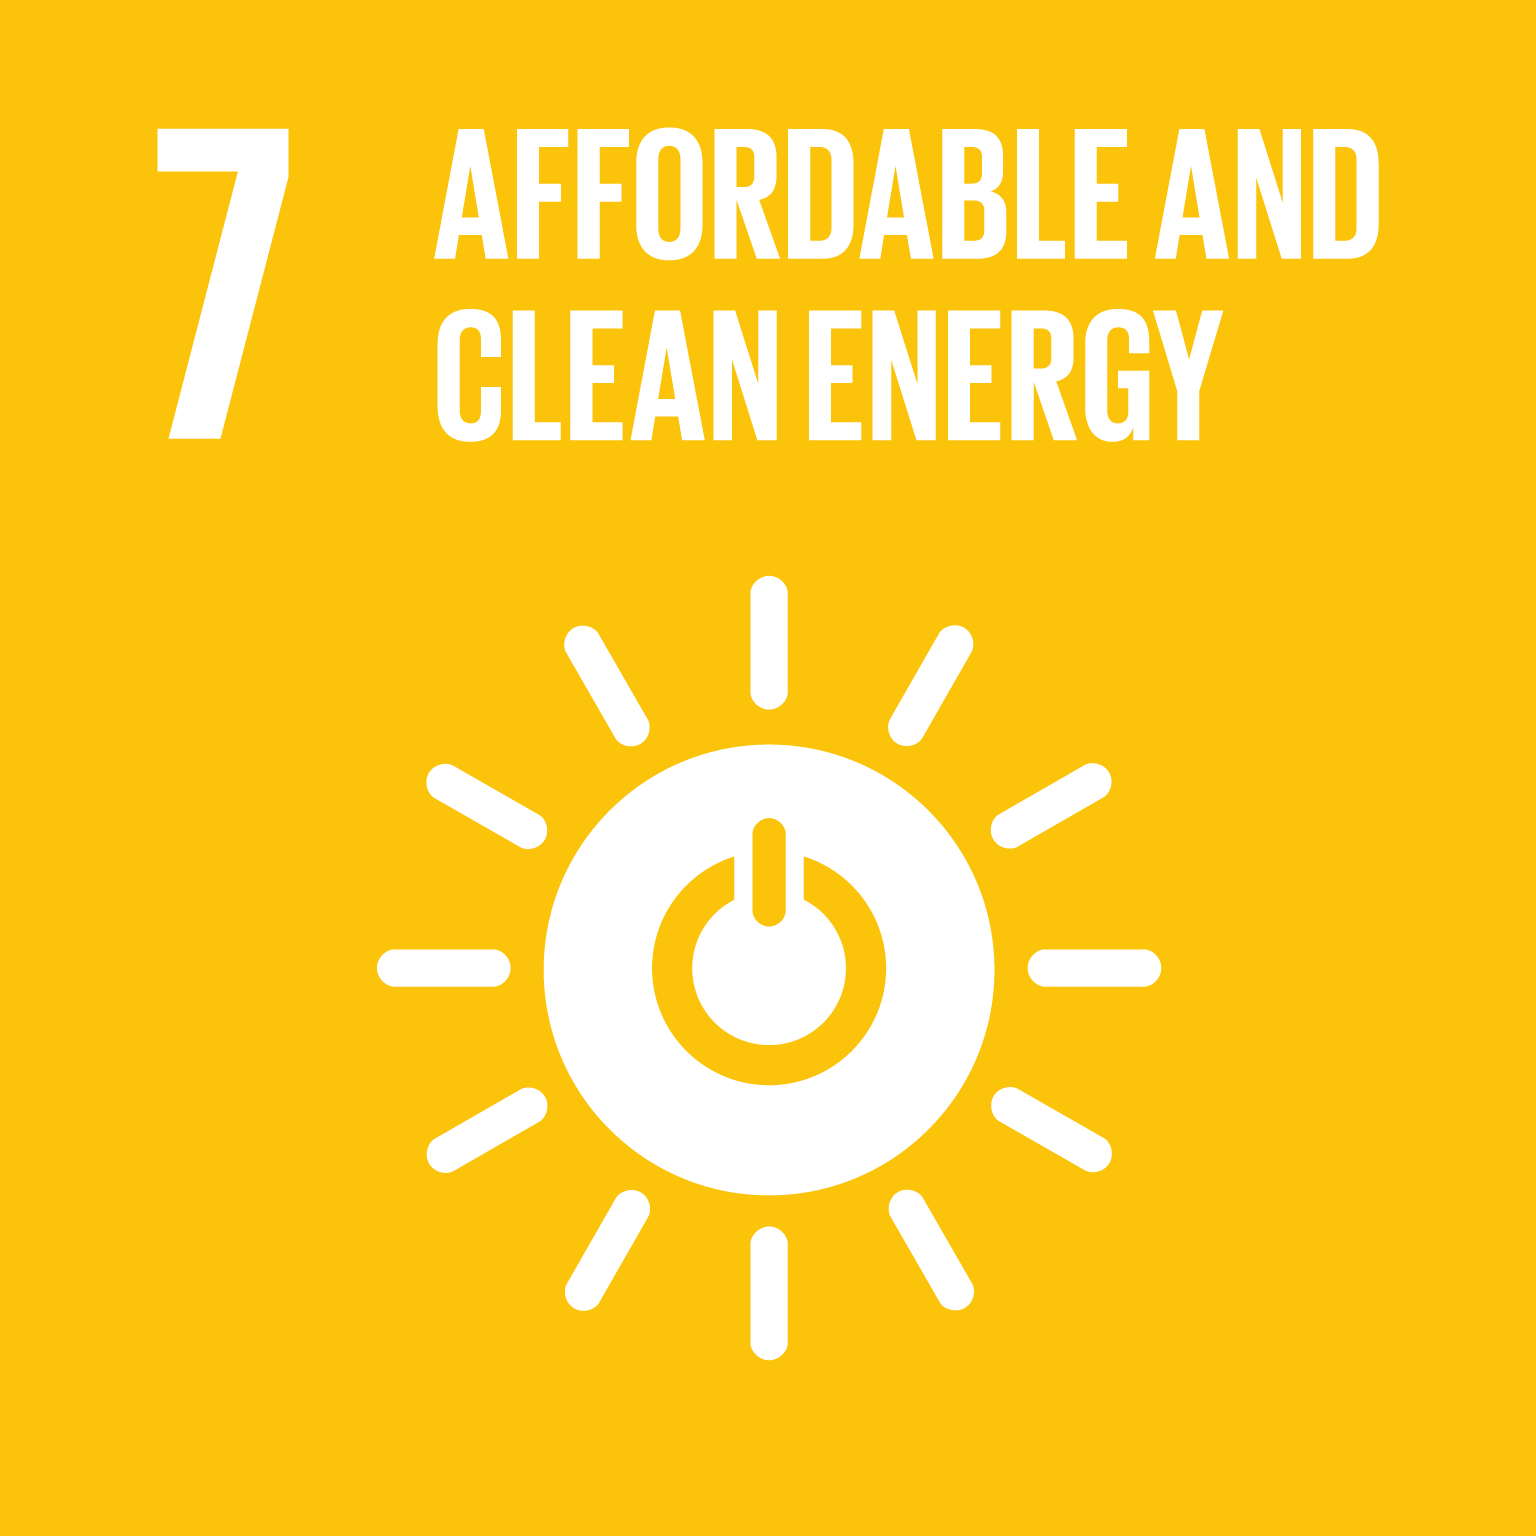 【SDGs logo】AFFORDABLE AND CLEAN ENERGY